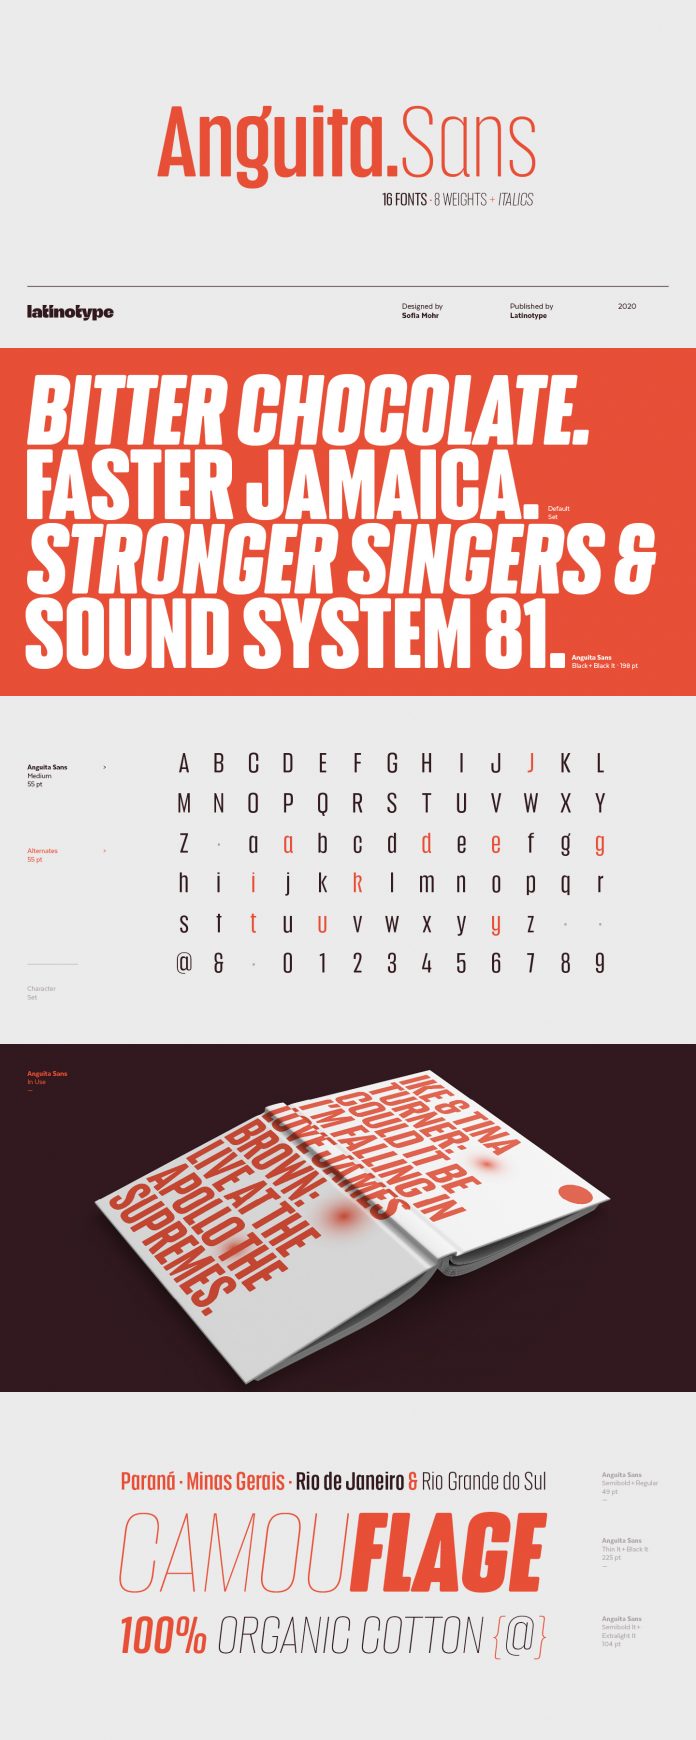 Anguita Sans font family from Latinotype.